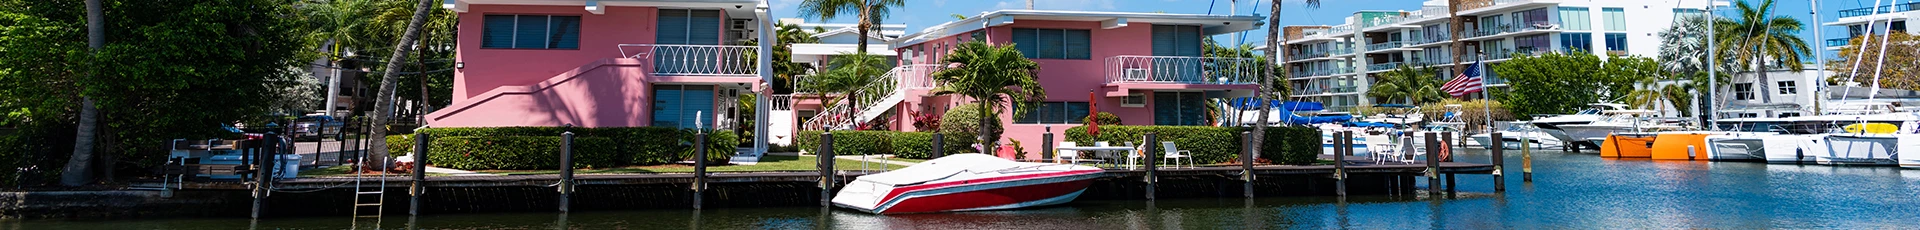 Boat Removal, Dismantle and Disposal in Punta Gorda Florida